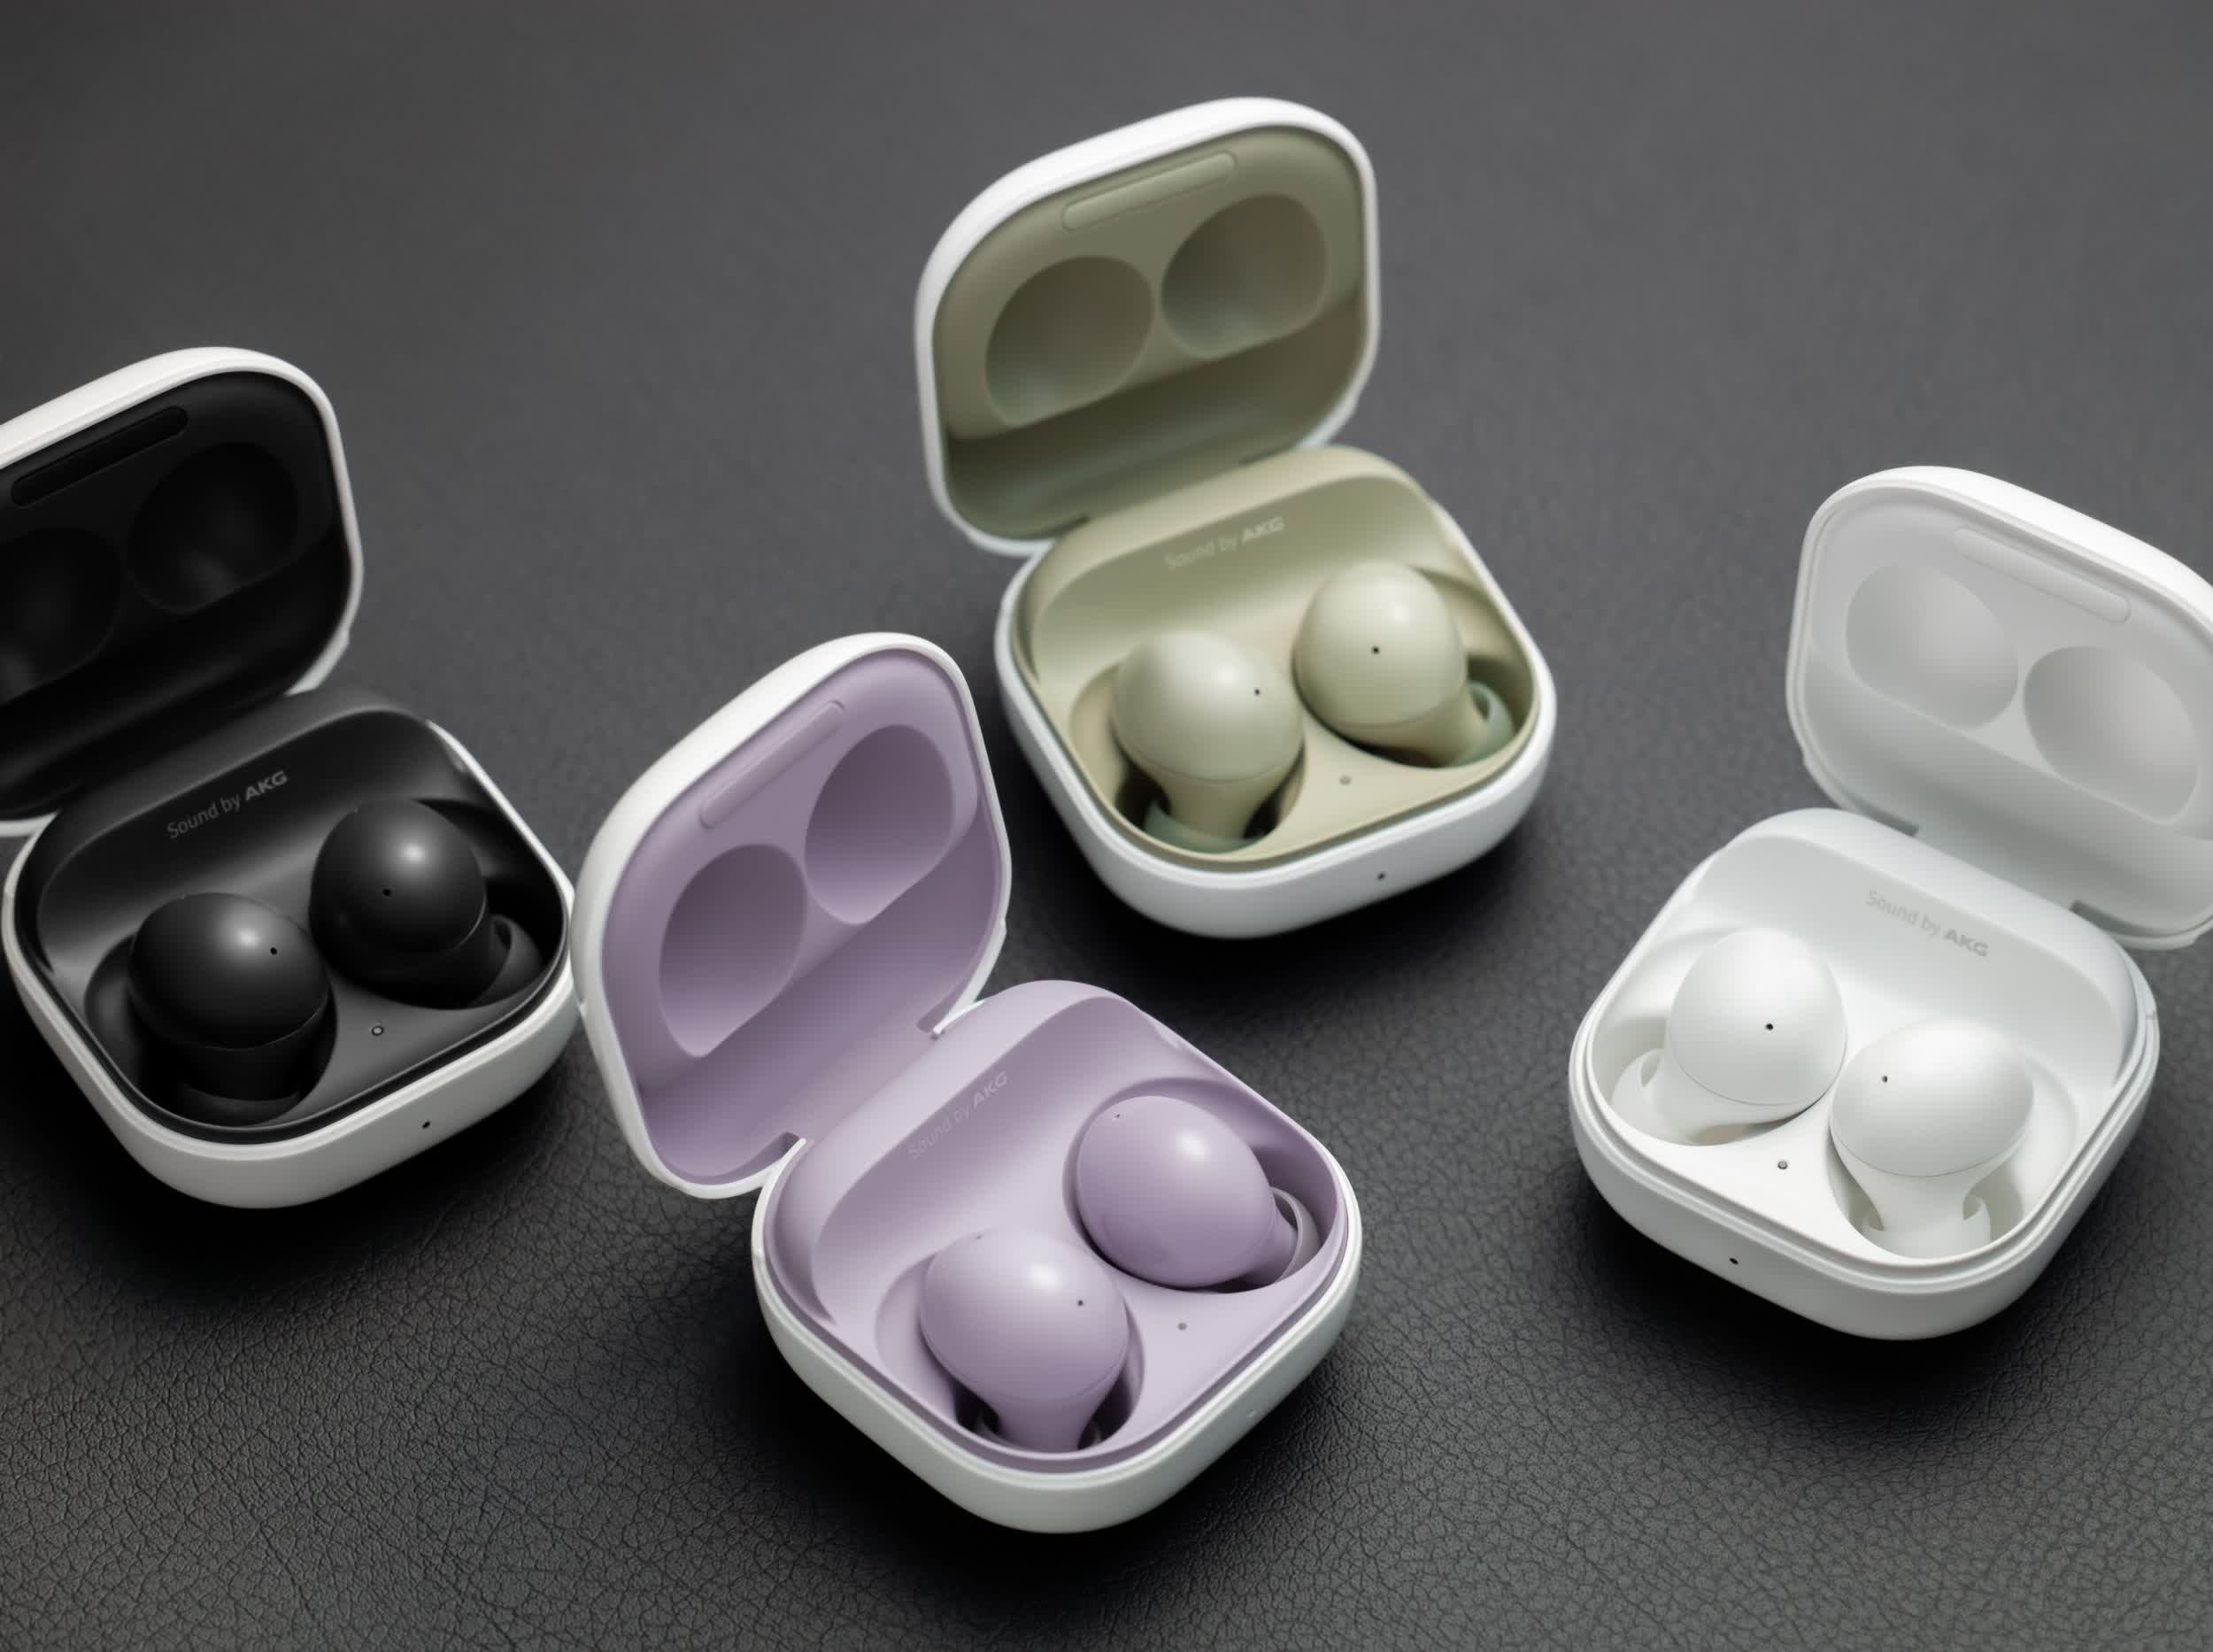 Samsung's new Galaxy Buds2 feature active noise cancellation from $149.99